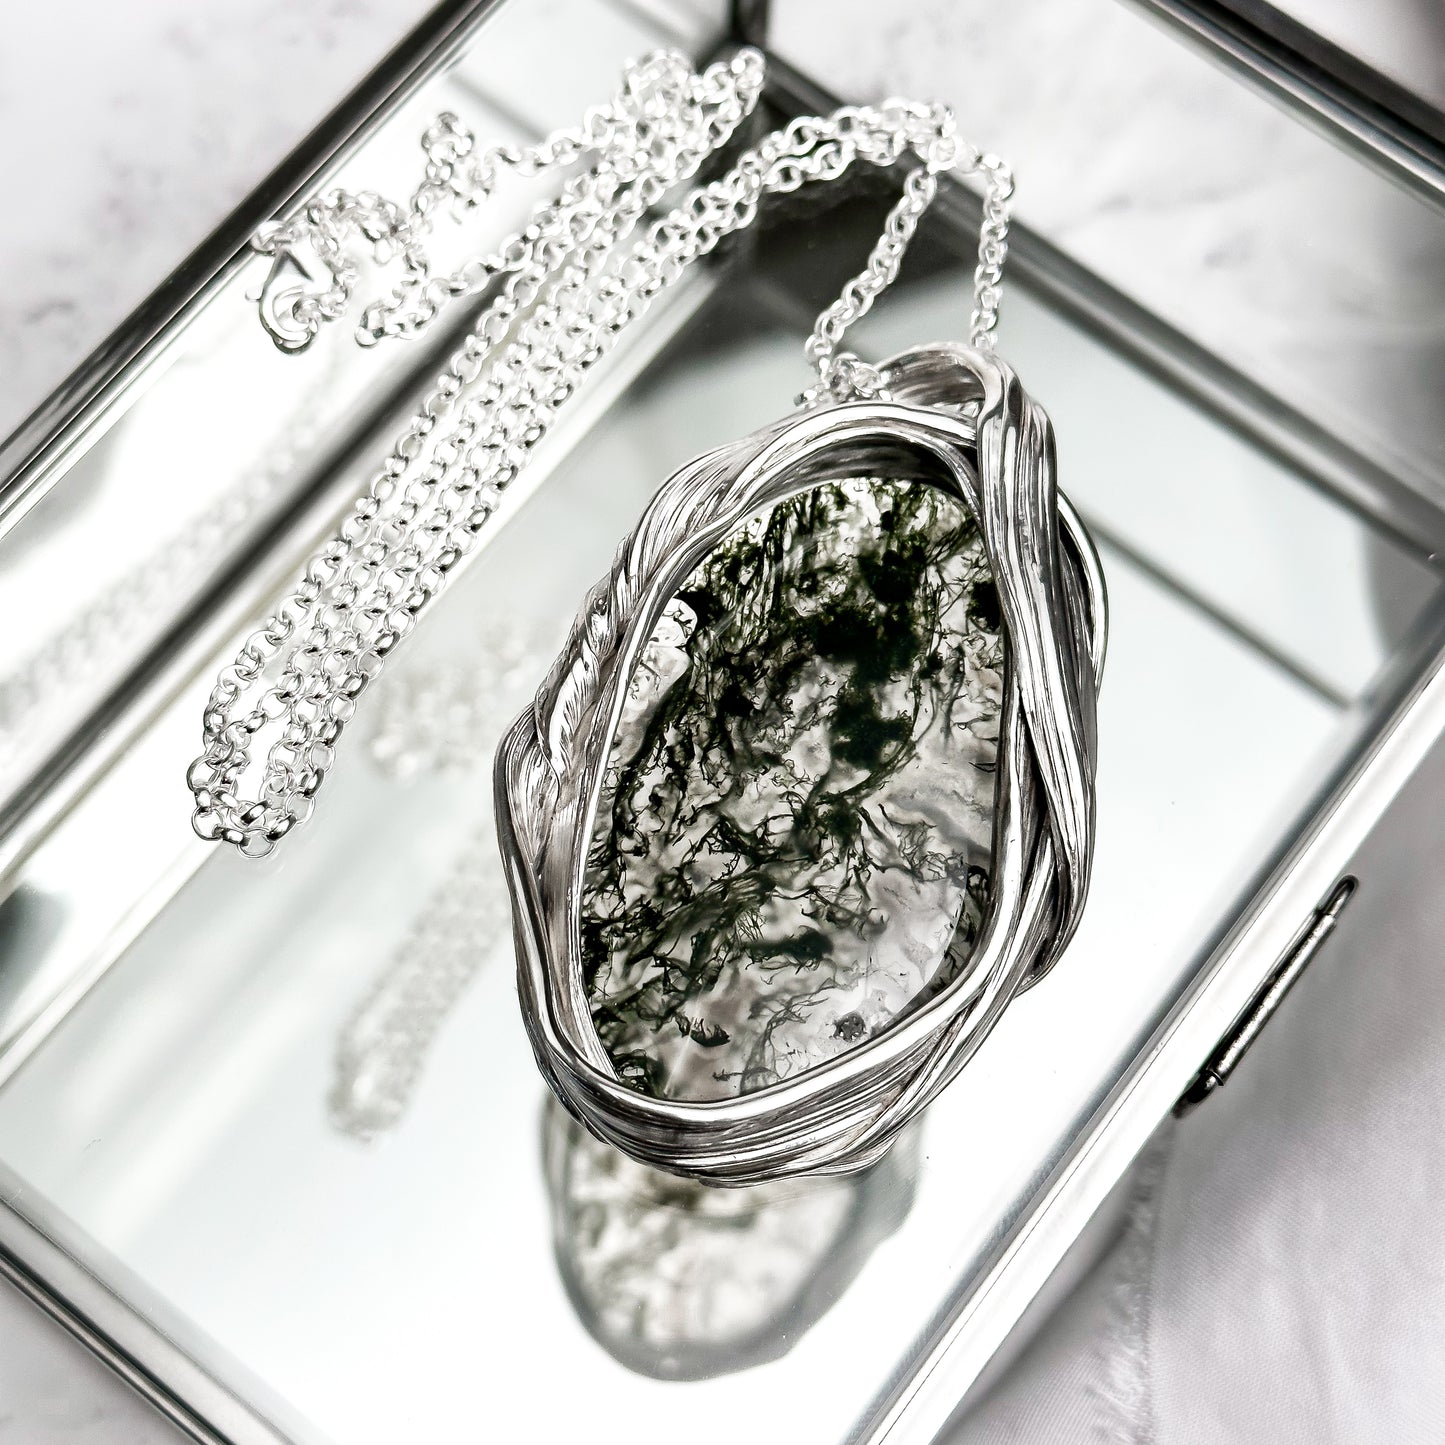 One of a Kind Long Sterling Silver Drift Necklace with Moss Agate